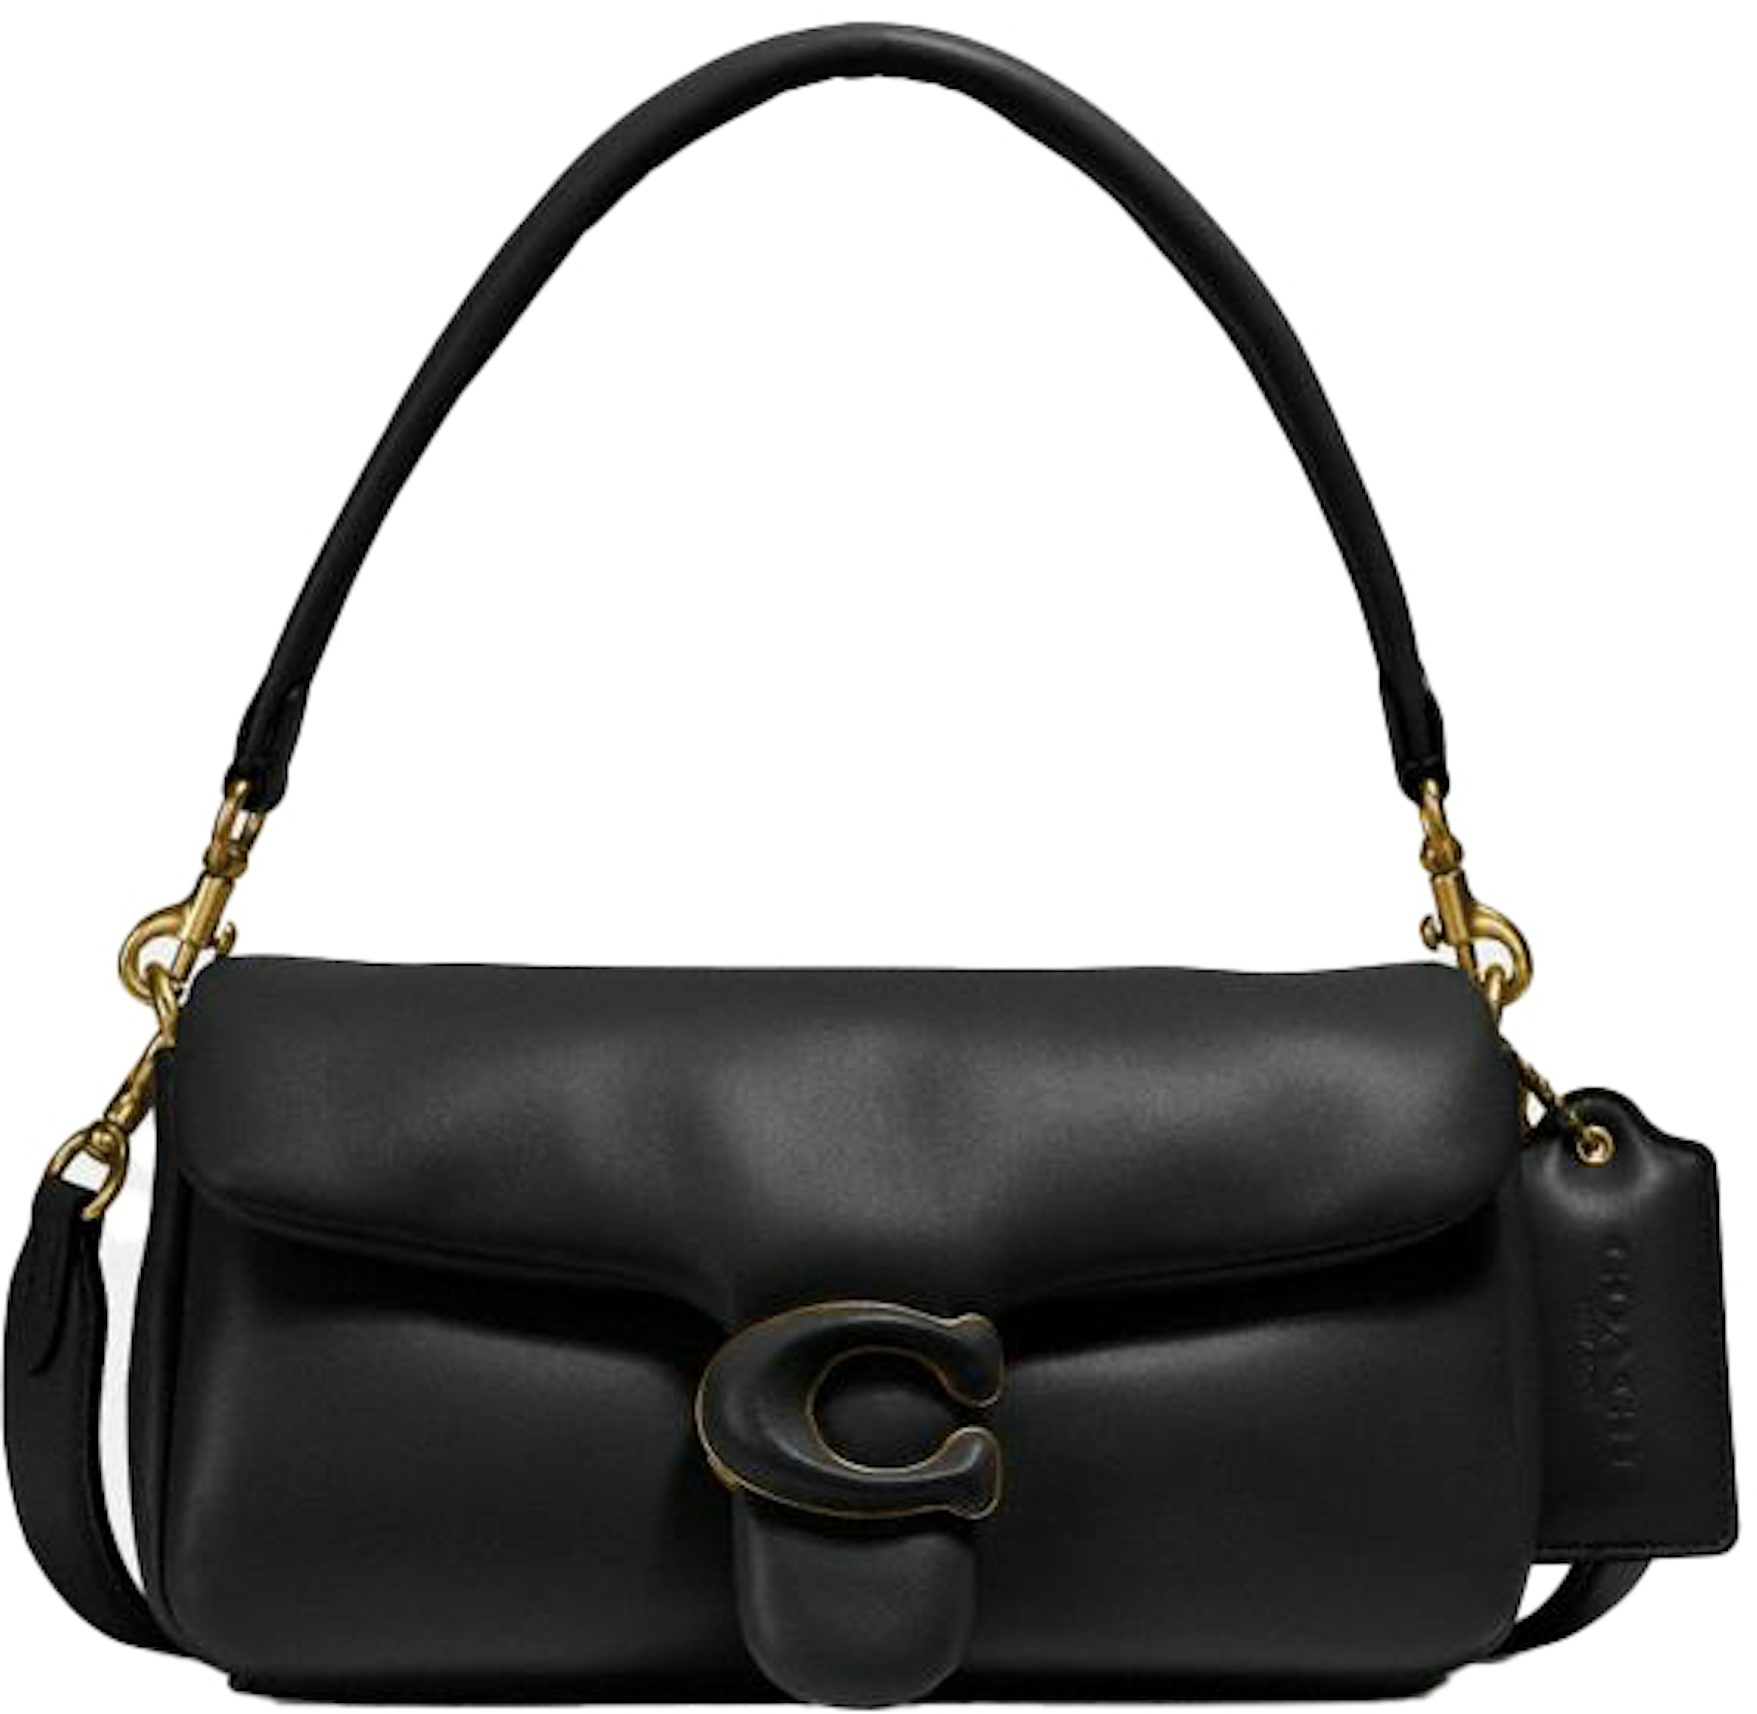 Coach Pillow Tabby Shoulder Bag 26 Black in Nappa/Smooth Leather